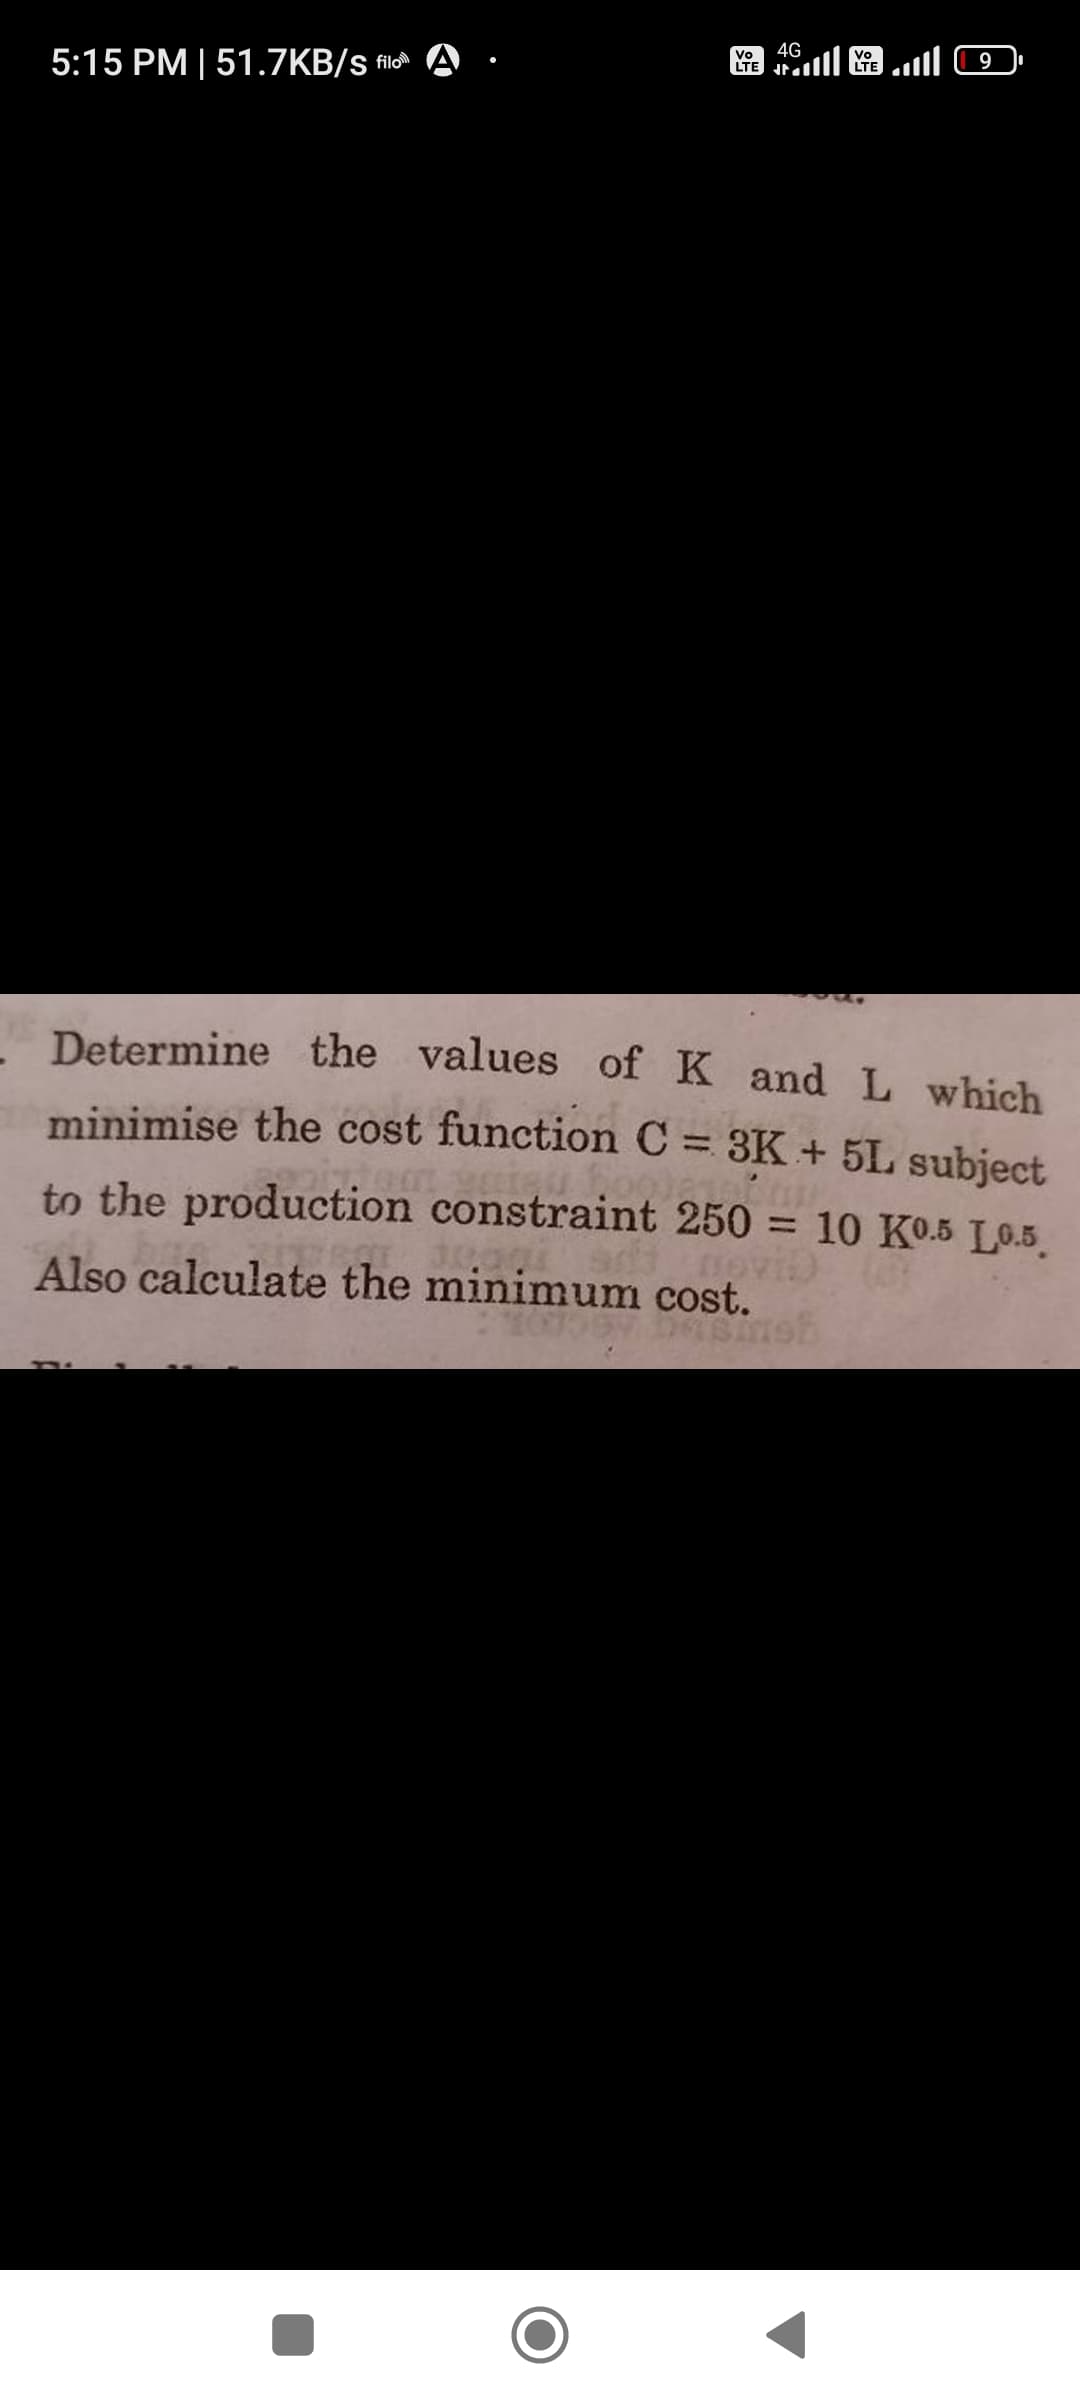 5:15 PM | 51.7KB/s filo
Vo 4G
LTE
| اس
Vo
LTE
9
Determine the values of K
and L which
minimise the cost function C = 3K + 5L subject
210
to the production constraint 250 = 10 K0.5 L0.5
Also calculate the minimum cost.
Desinsh